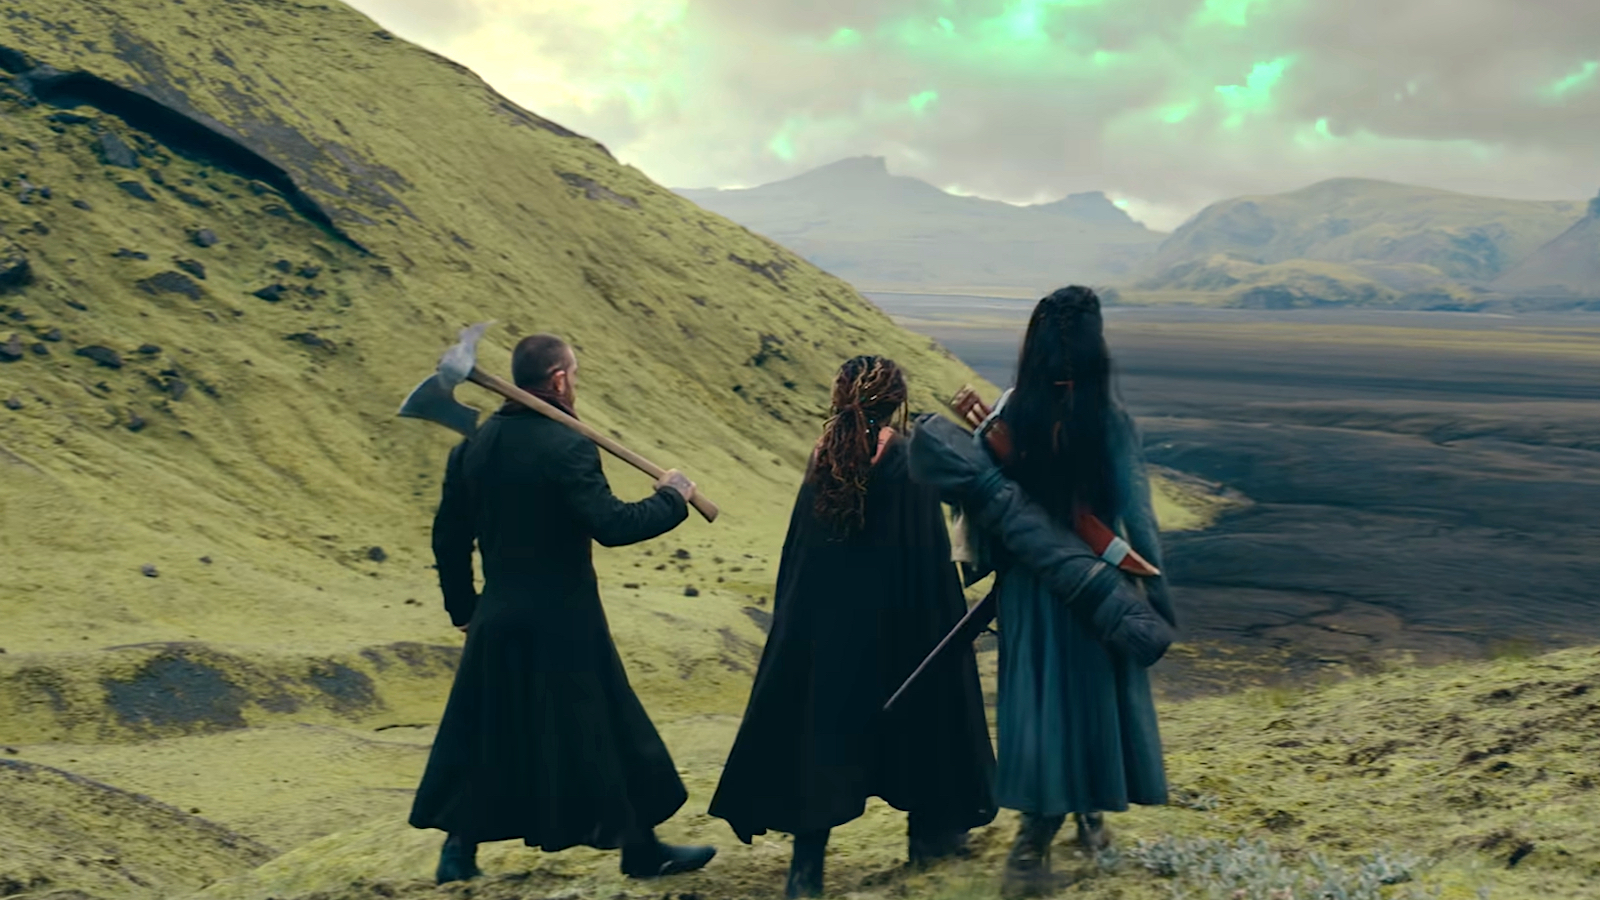 The cast of 'The Witcher: Blood Origin' surrounded by mountains and green clouds